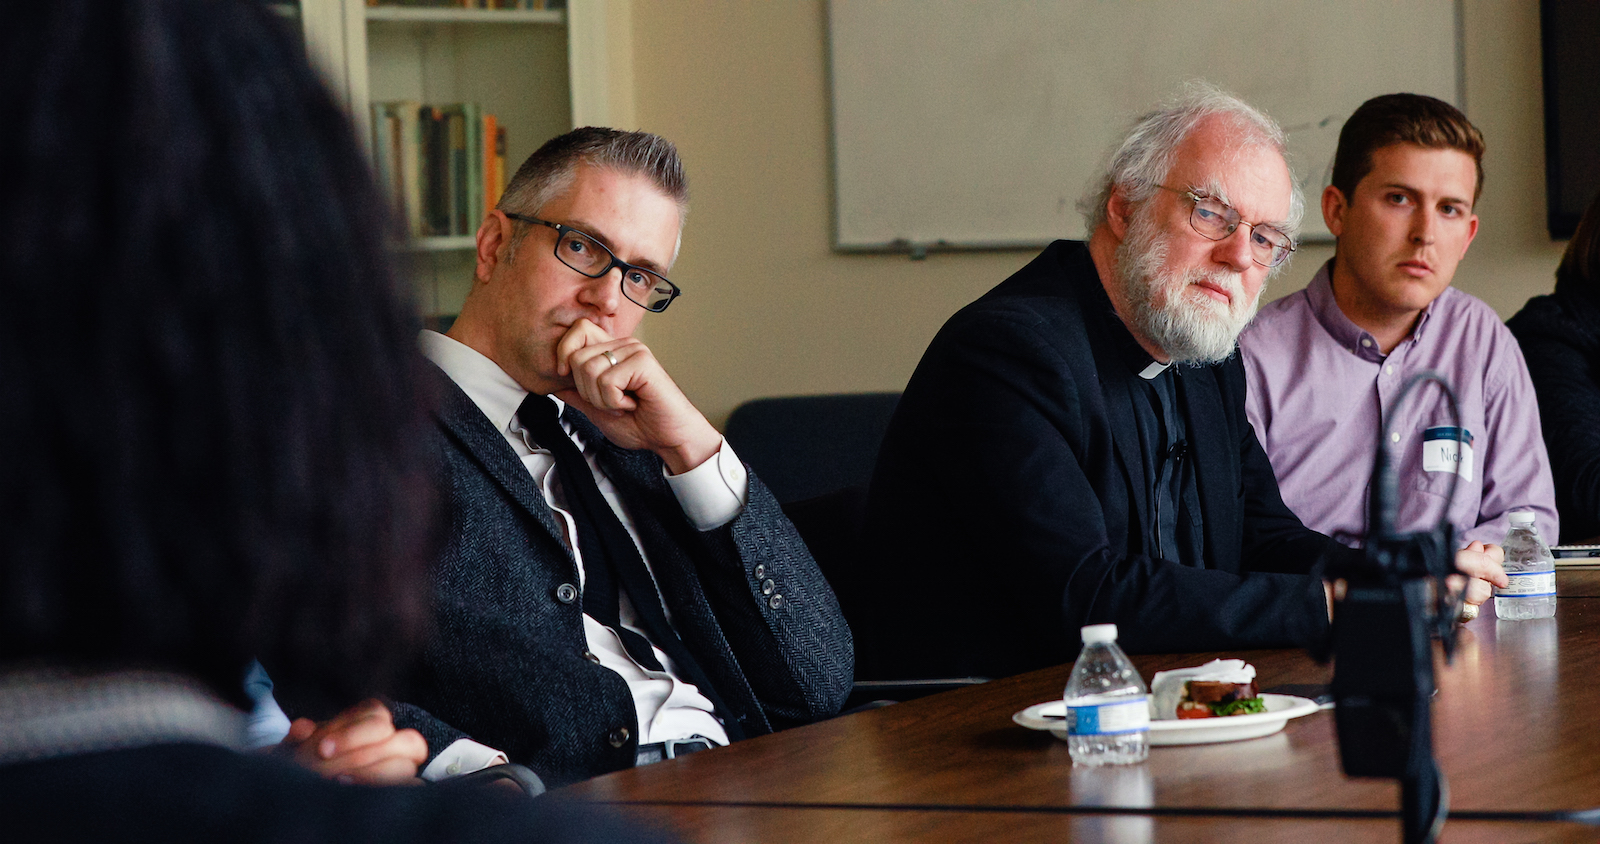 In the Room with Rowan Williams